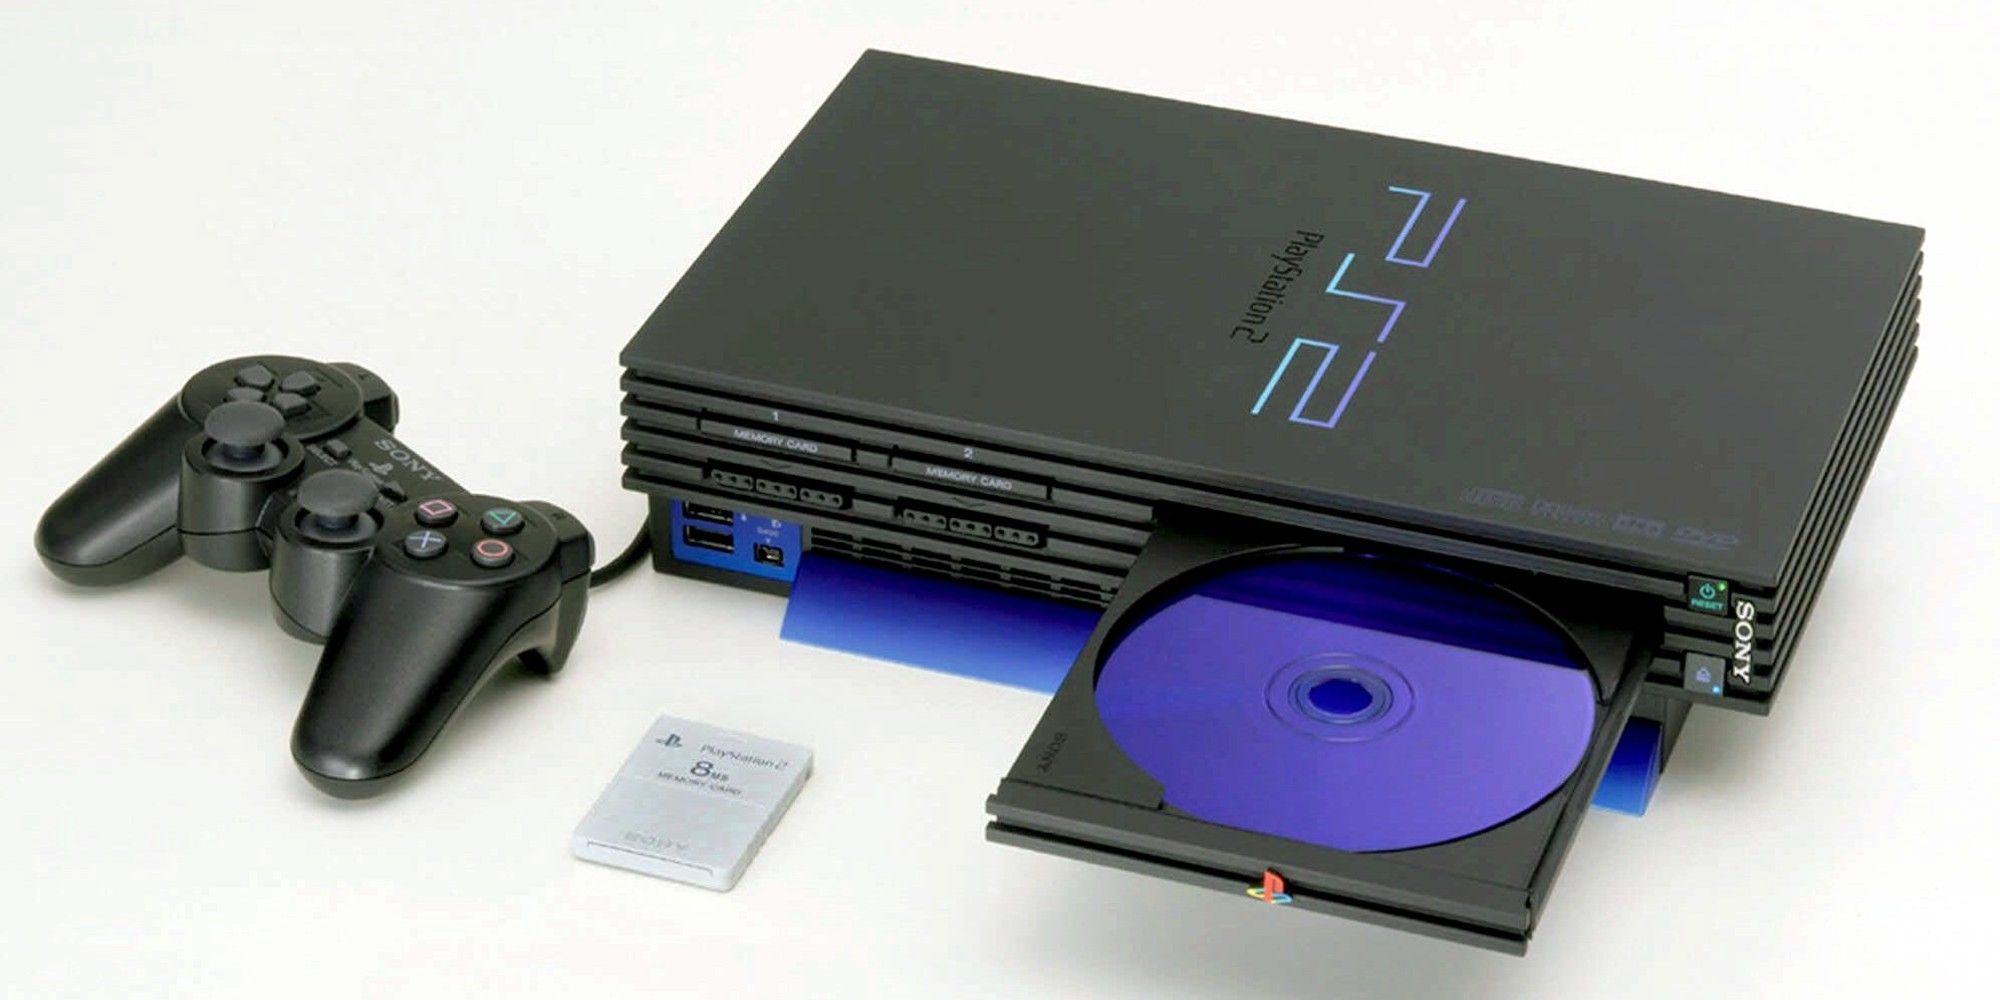 20 Years Later: How Concerns About Weaponized Consoles Almost Sunk the PS2